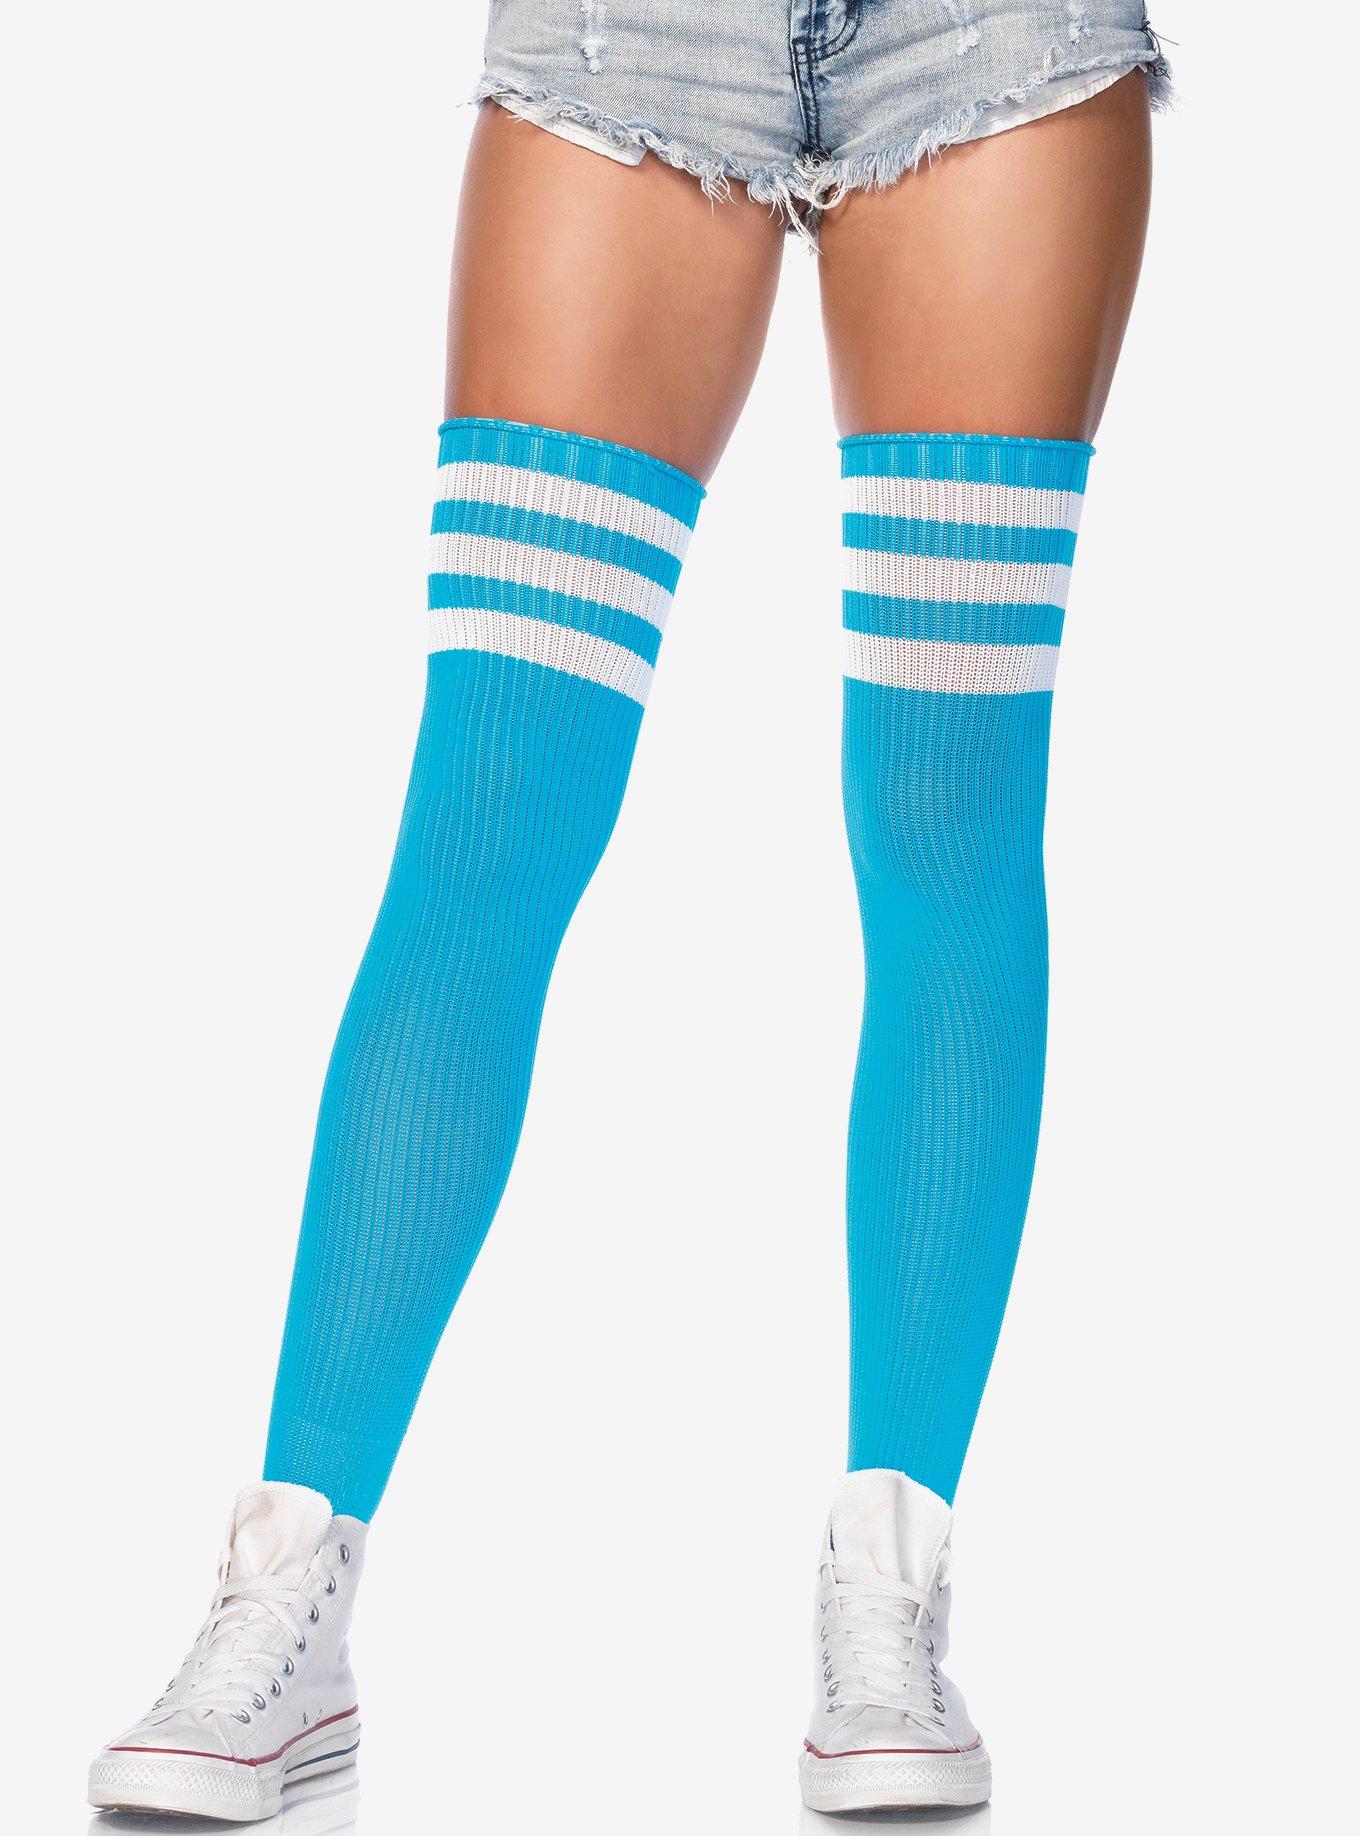 Athletic 3 Stripe Thigh Highs Neon Blue